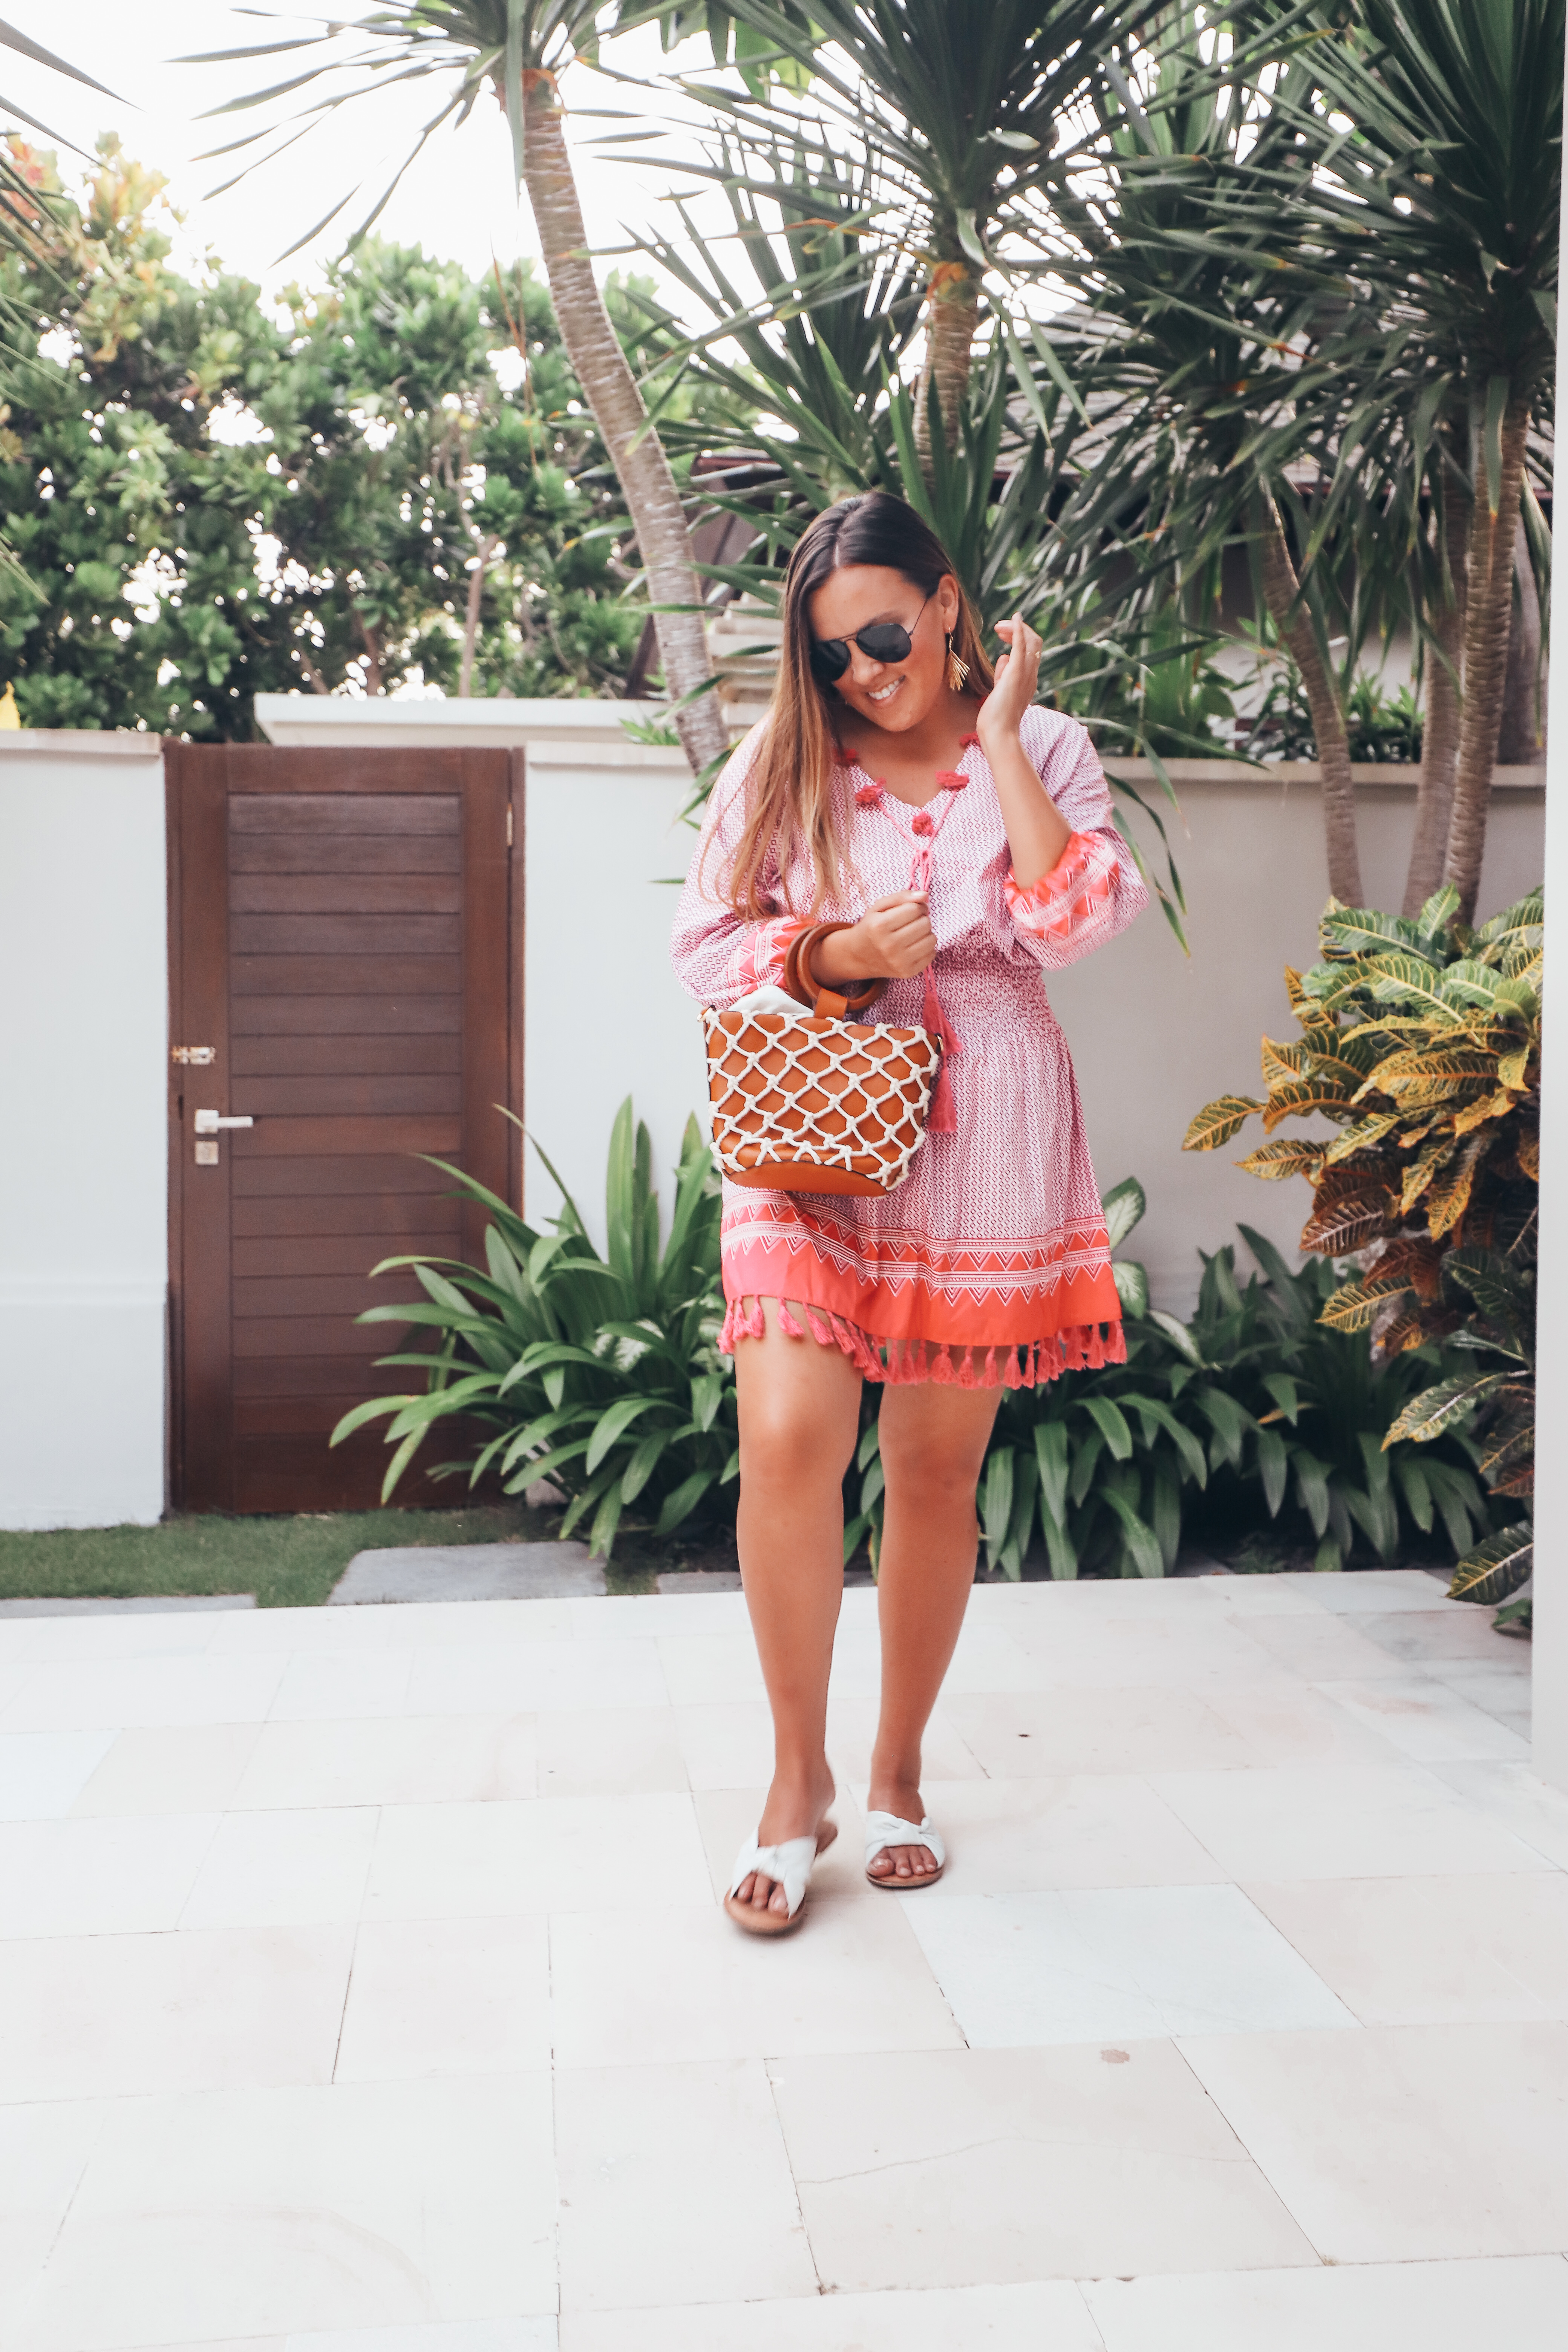 San Francisco blogger, Ashley Zeal from Two Peas in a Prada shares her May 2019 Best Sellers. She is going through the top 10 products you guys bought the most of last month!